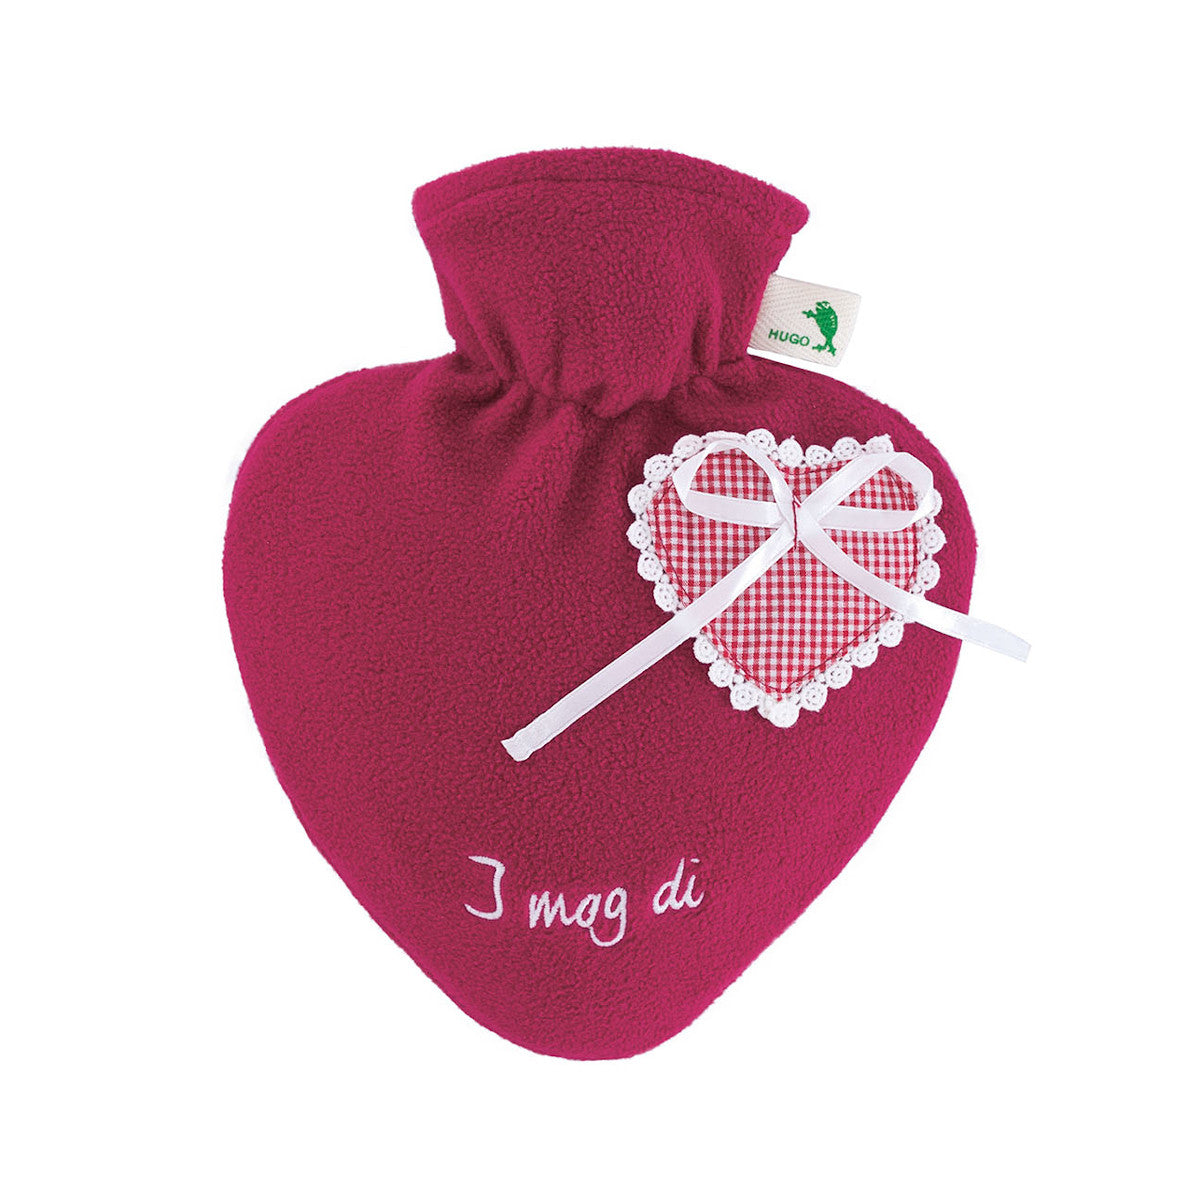 Hot Water Bottle Classic with Cover, Fleece - Red "I mog di"